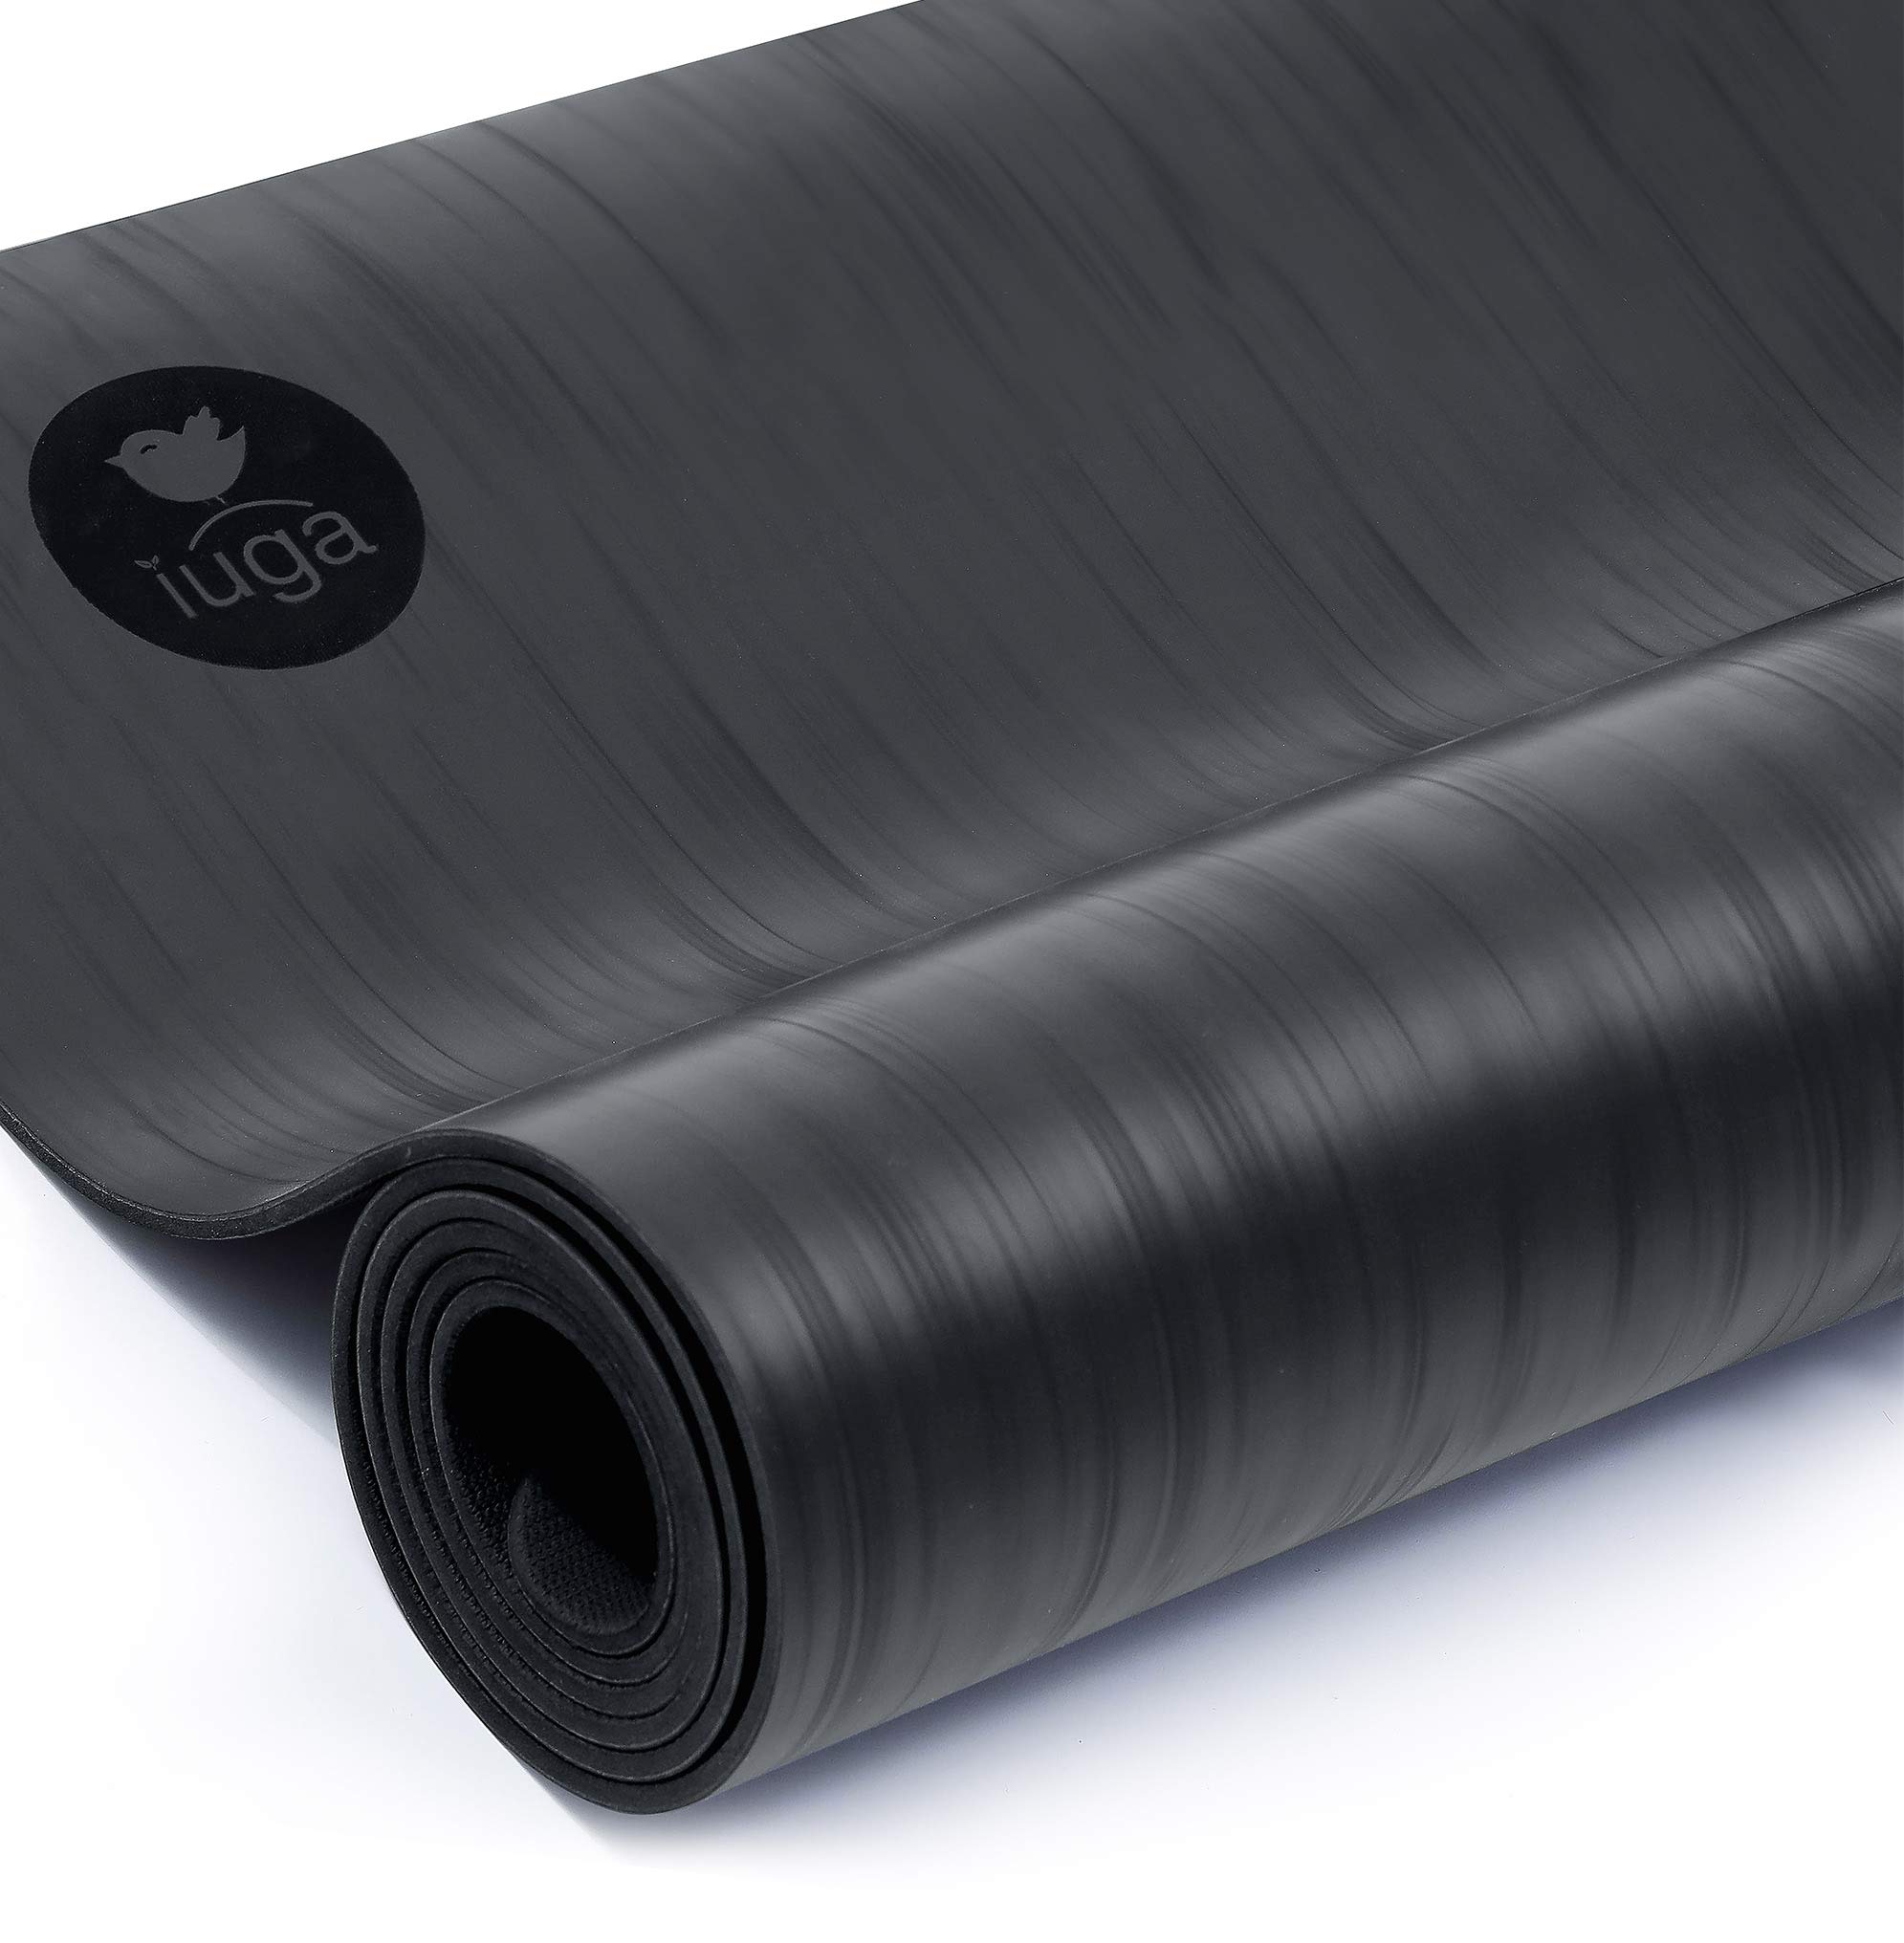 IUGA Pro Non Slip Yoga Mat, Unbeatable Non Slip Performance, Eco Friendly  and SGS Certified Material for Hot Yoga, Odorless Lightweight and Extra  Large Size, Free Carry Strap Gray